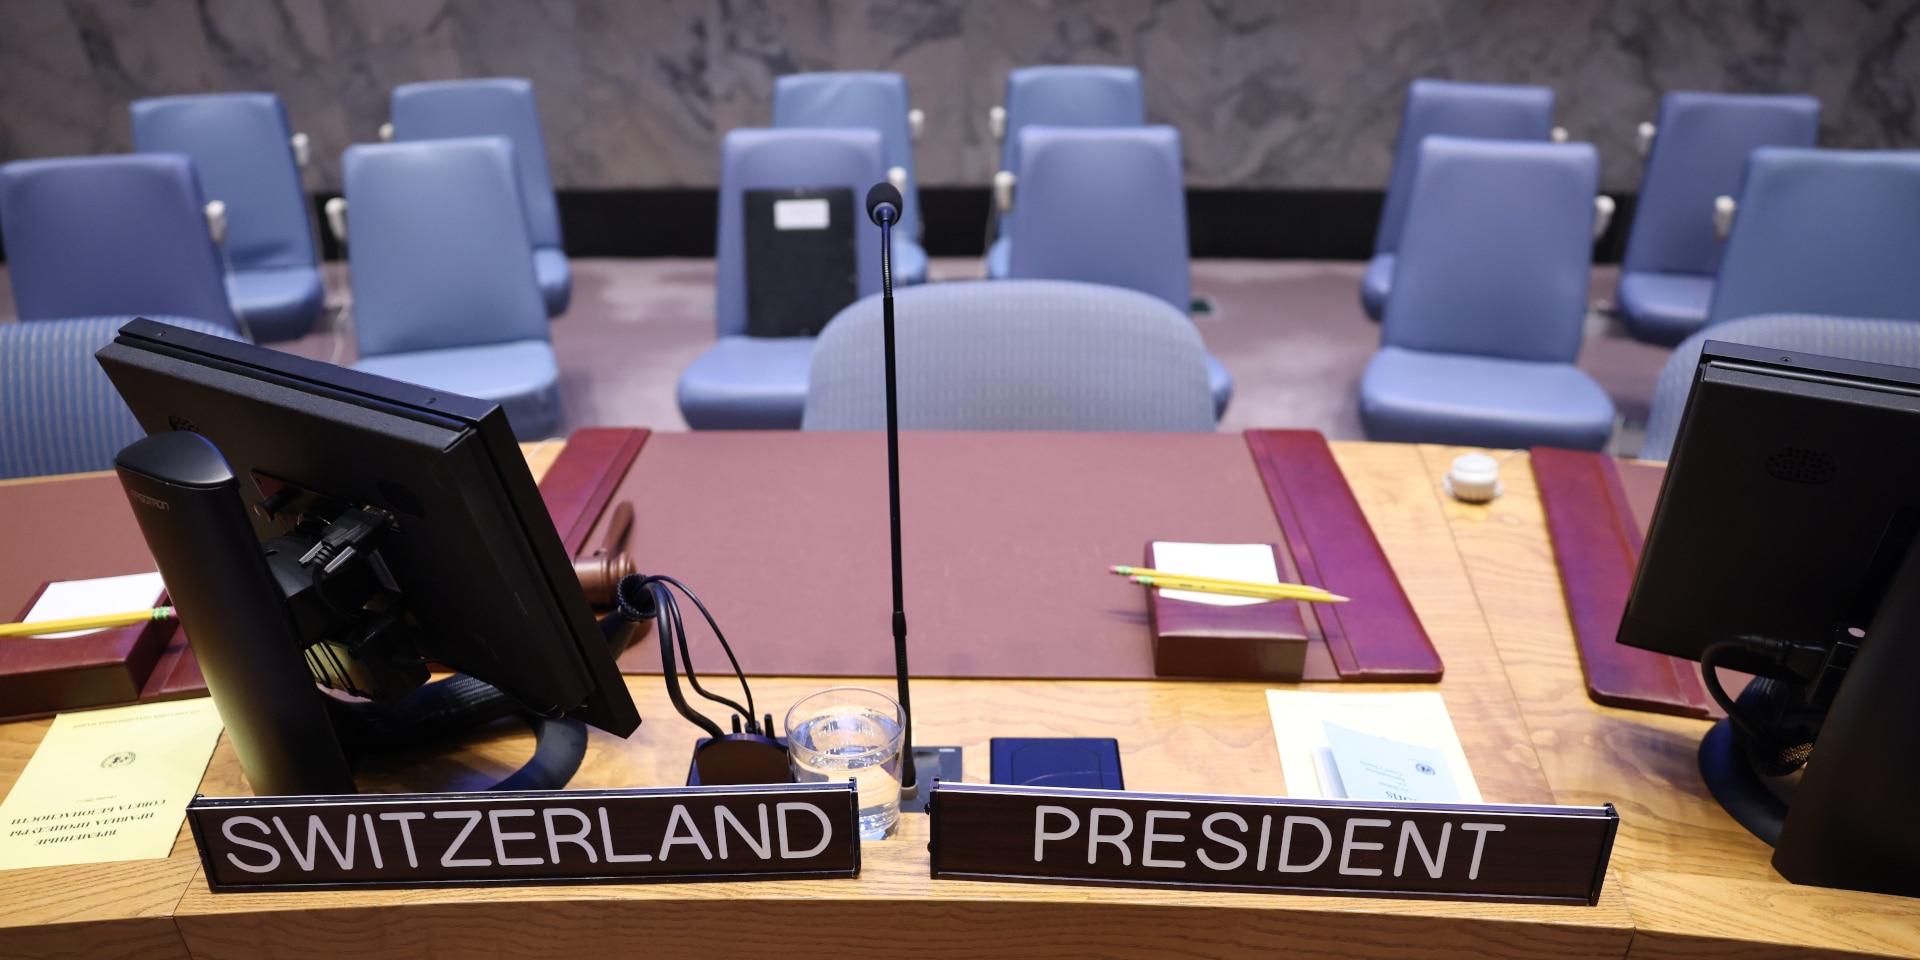 There are two wooden tablets on the wooden table of the UN Security Council. On one is written "Switzerland" and on the other "President".